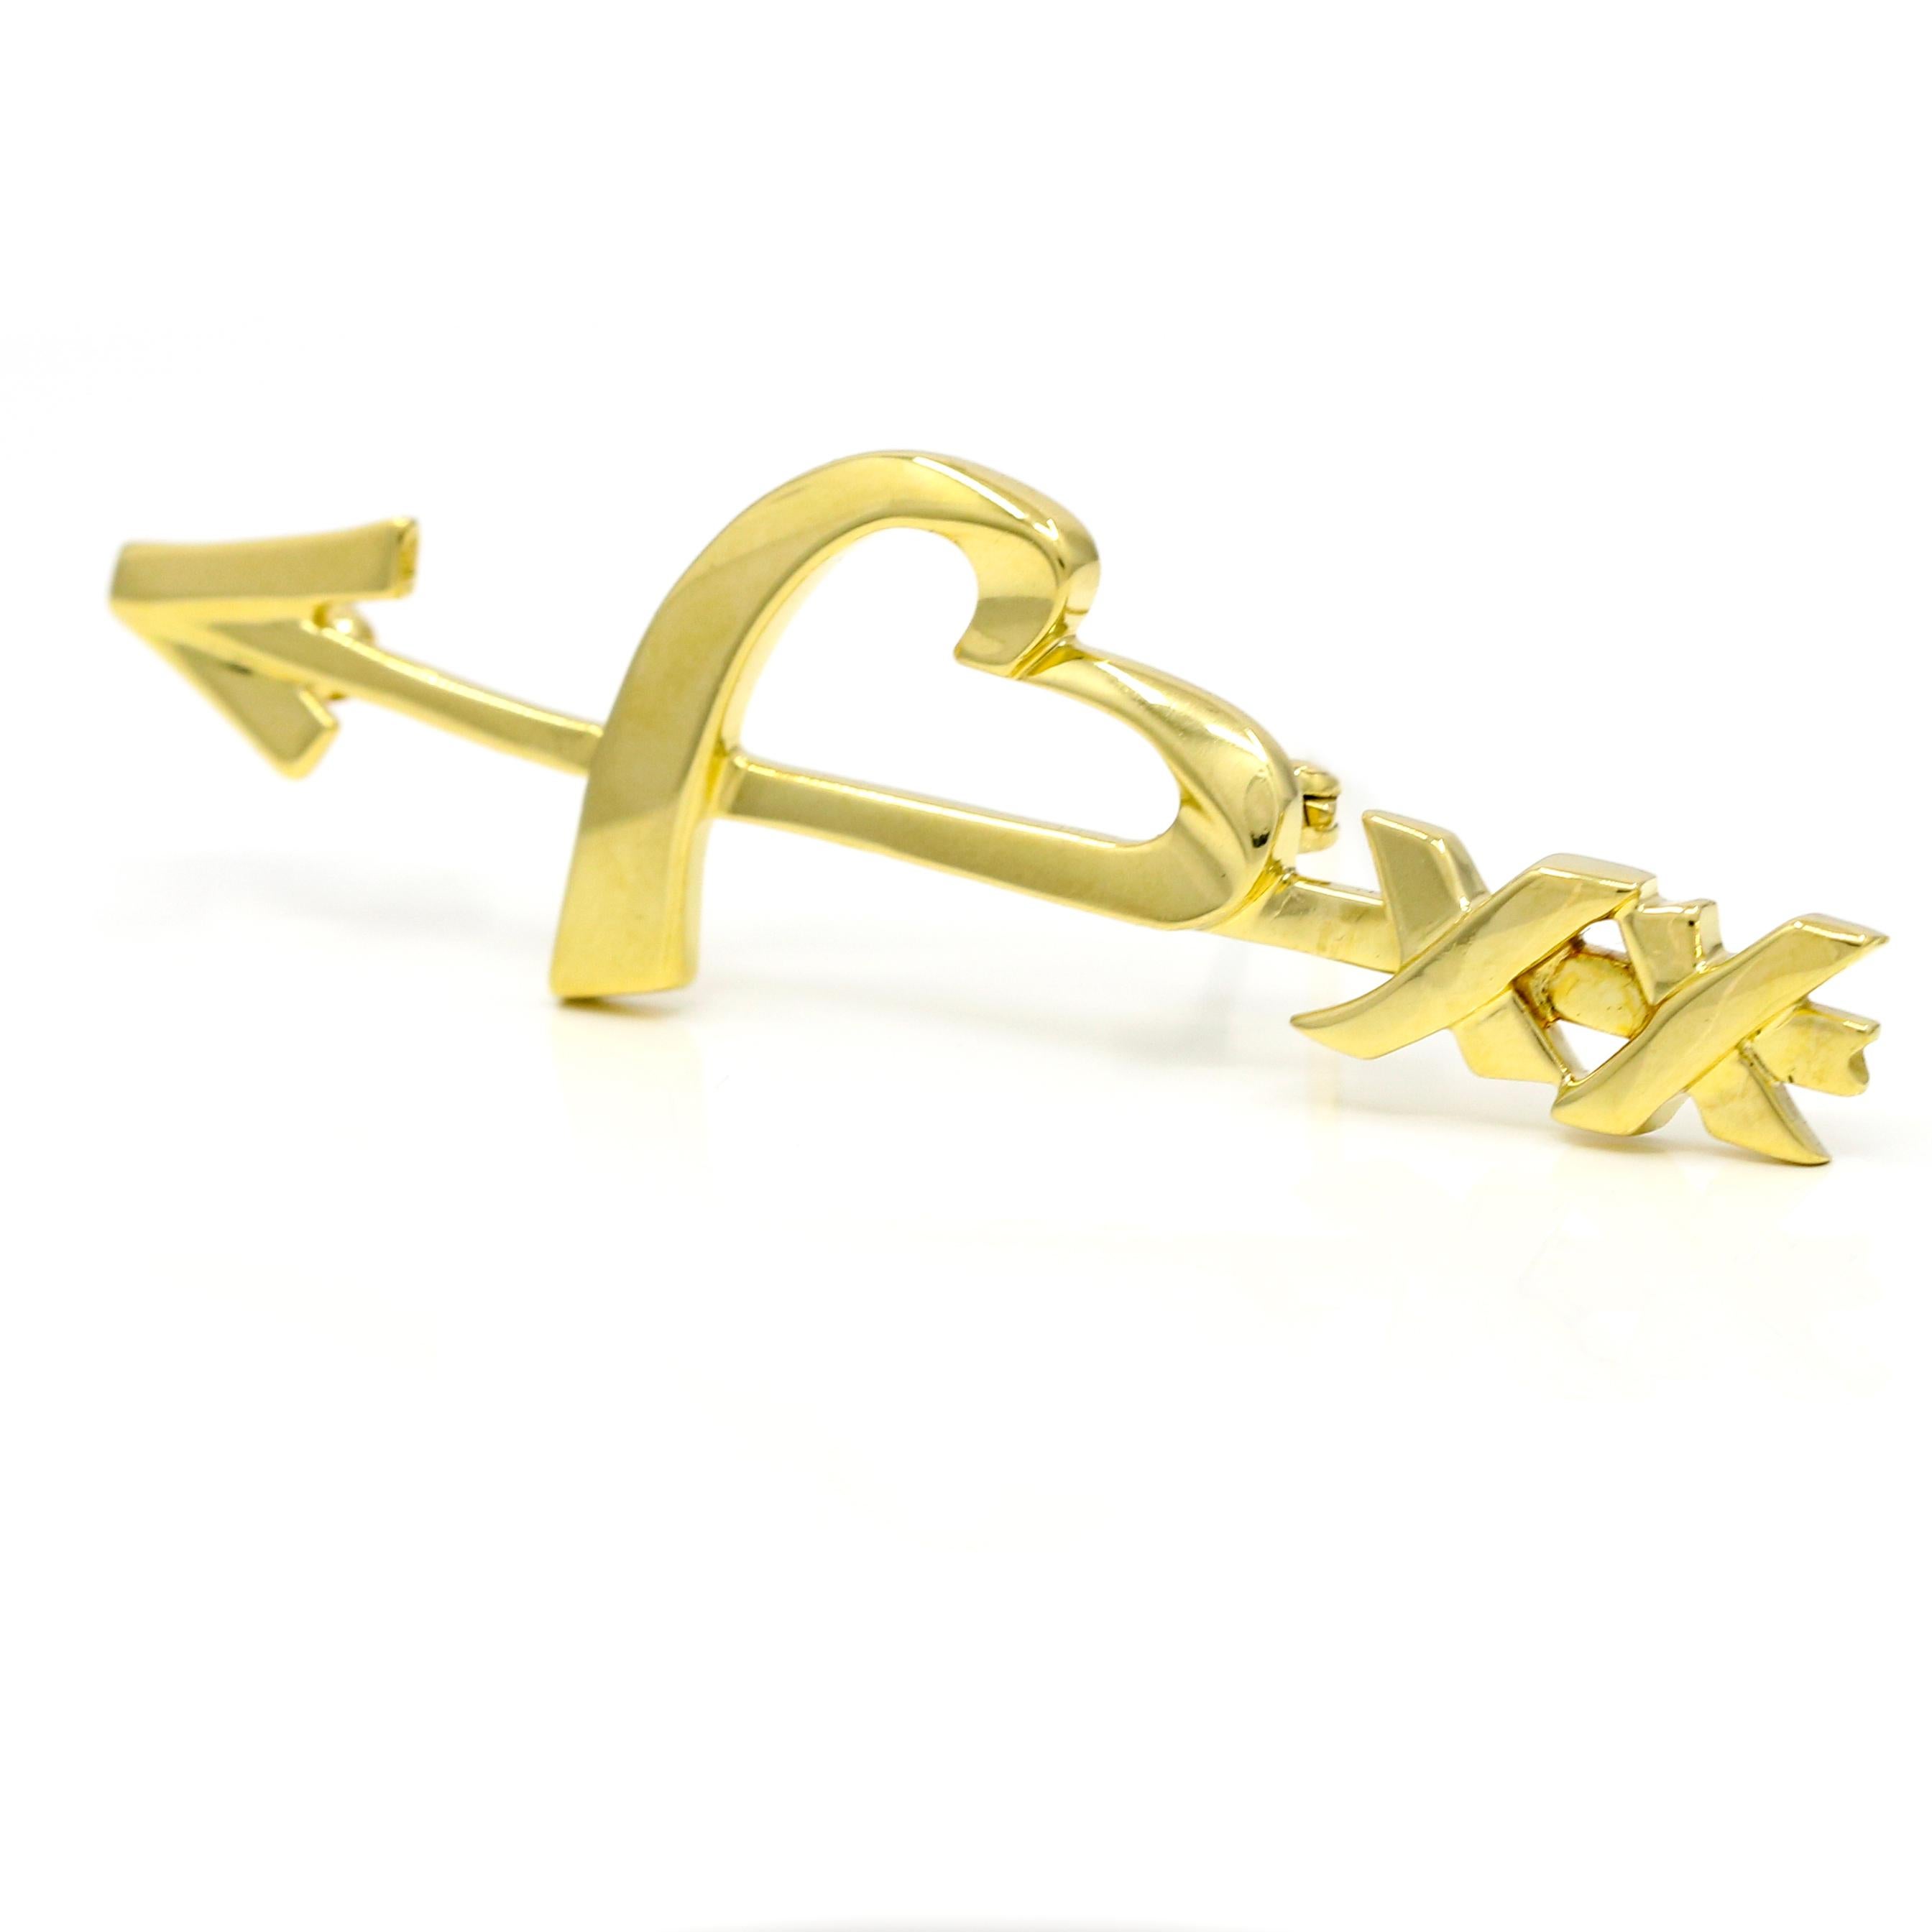 Heart and arrow brooch in 18-karat yellow gold by Paloma Picasso for Tiffany & Co. 

Length, 54mm
Width, 16mm
Depth, 2.5mm 
Weight, 6.1 grams 

Previously owned, in excellent condition. Original packaging not included. Cleaned and polished. All